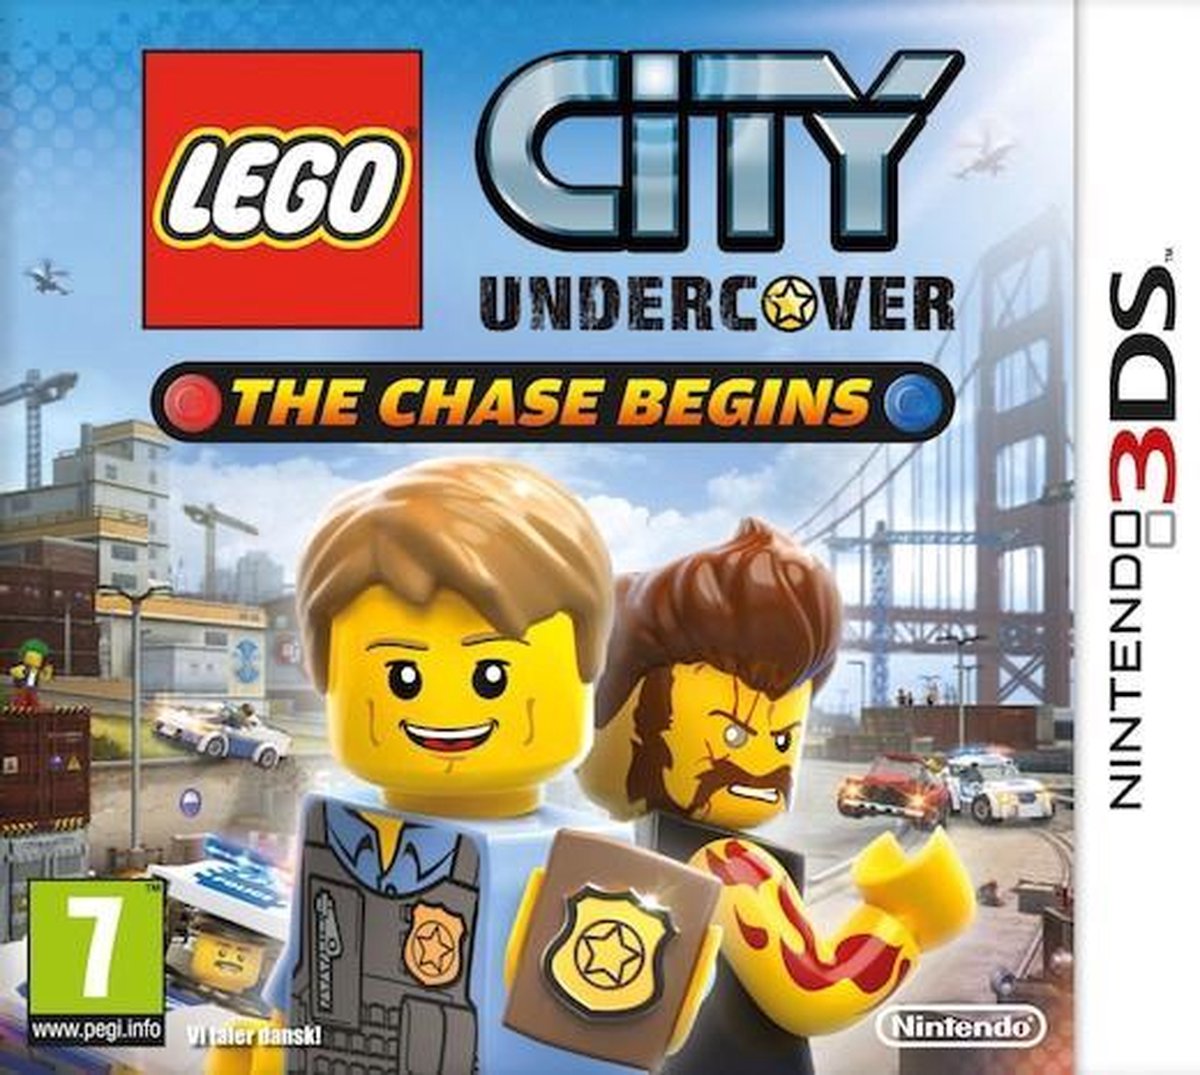 Nintendo LEGO City Undercover: The Chase Begins, 3DS Standaard Engels Nintendo 3DS - Nintendo